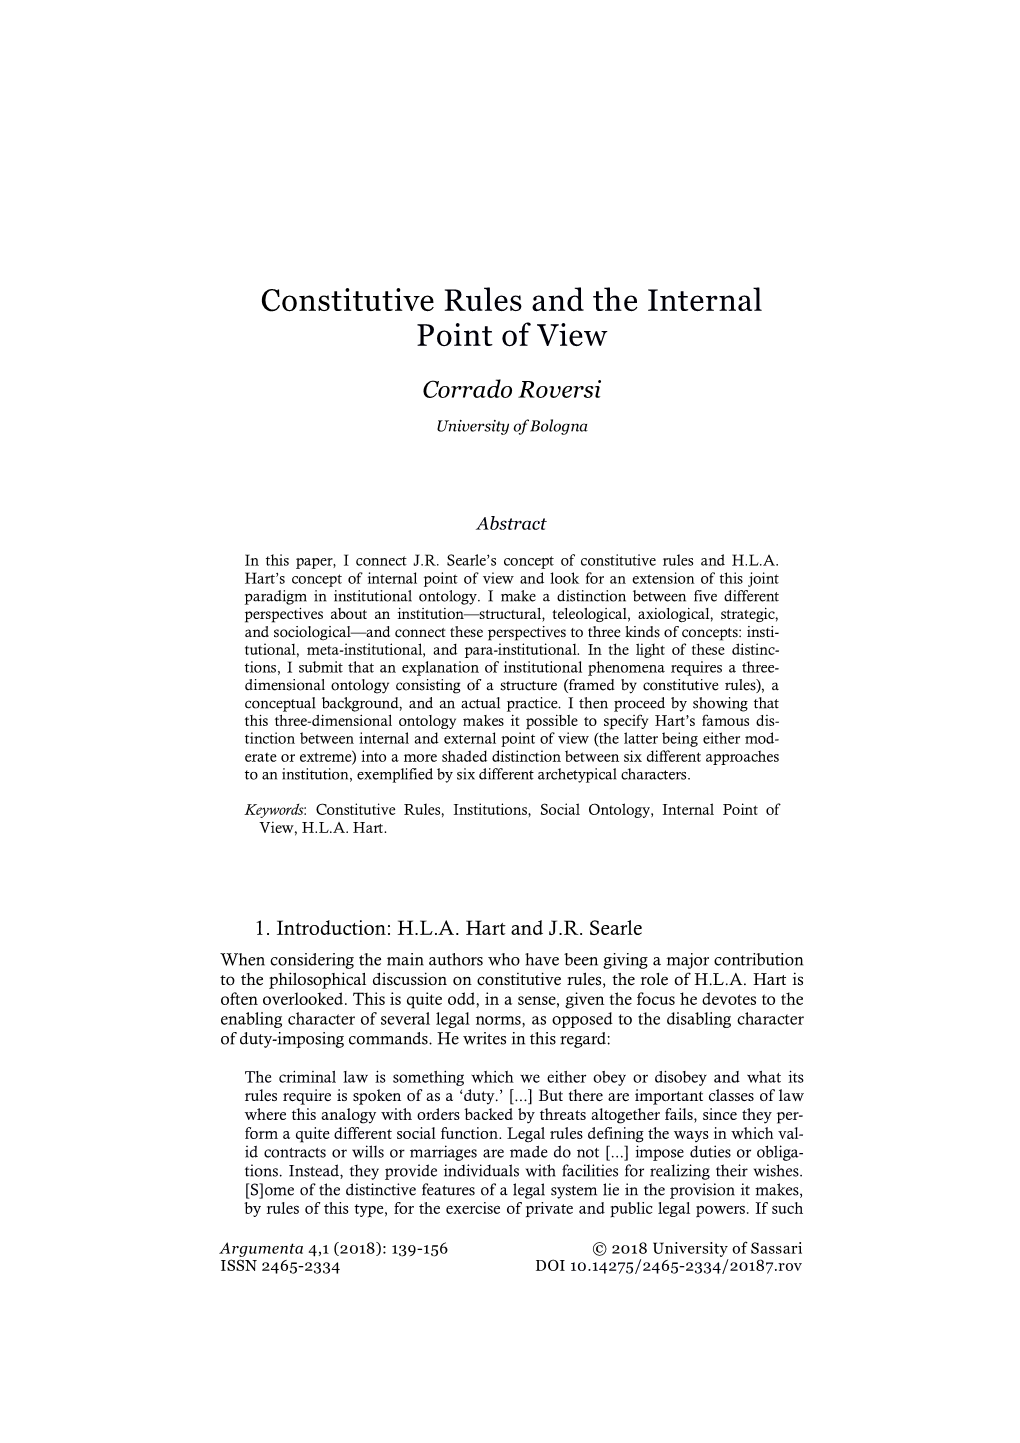 Constitutive Rules and the Internal Point of View